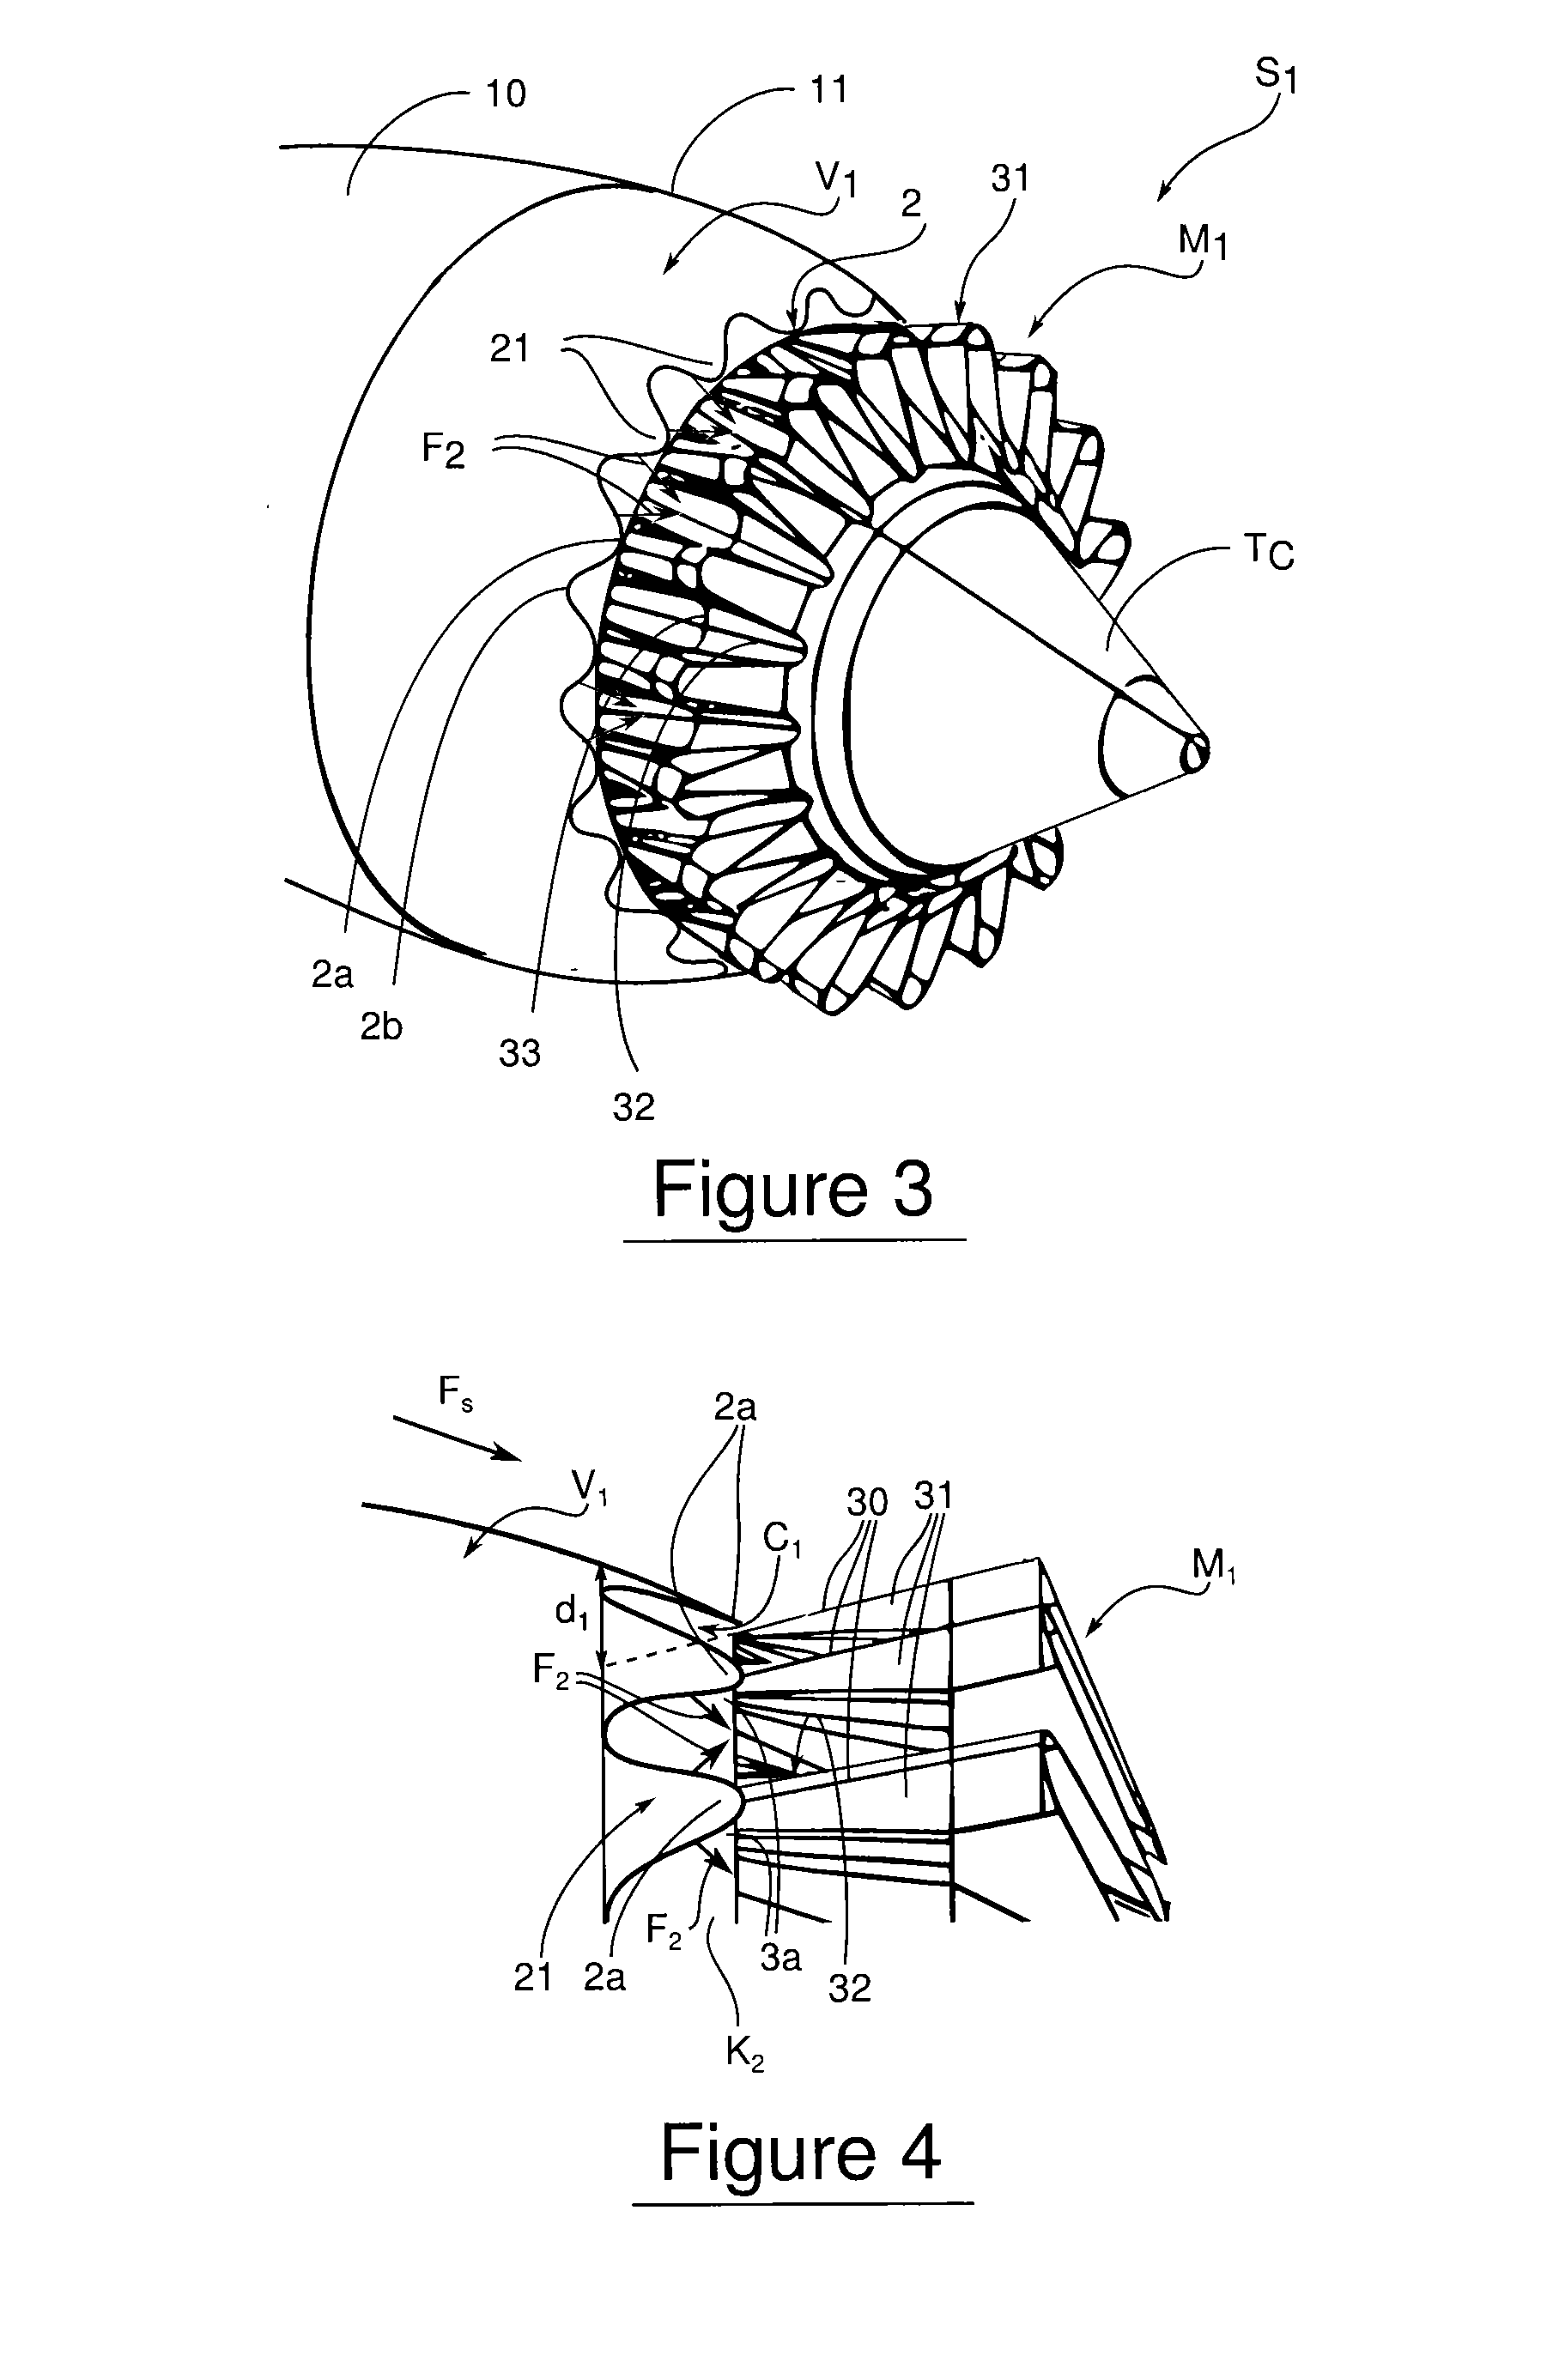 Method for mixing airflows in a turbofan and engine outlet for operation